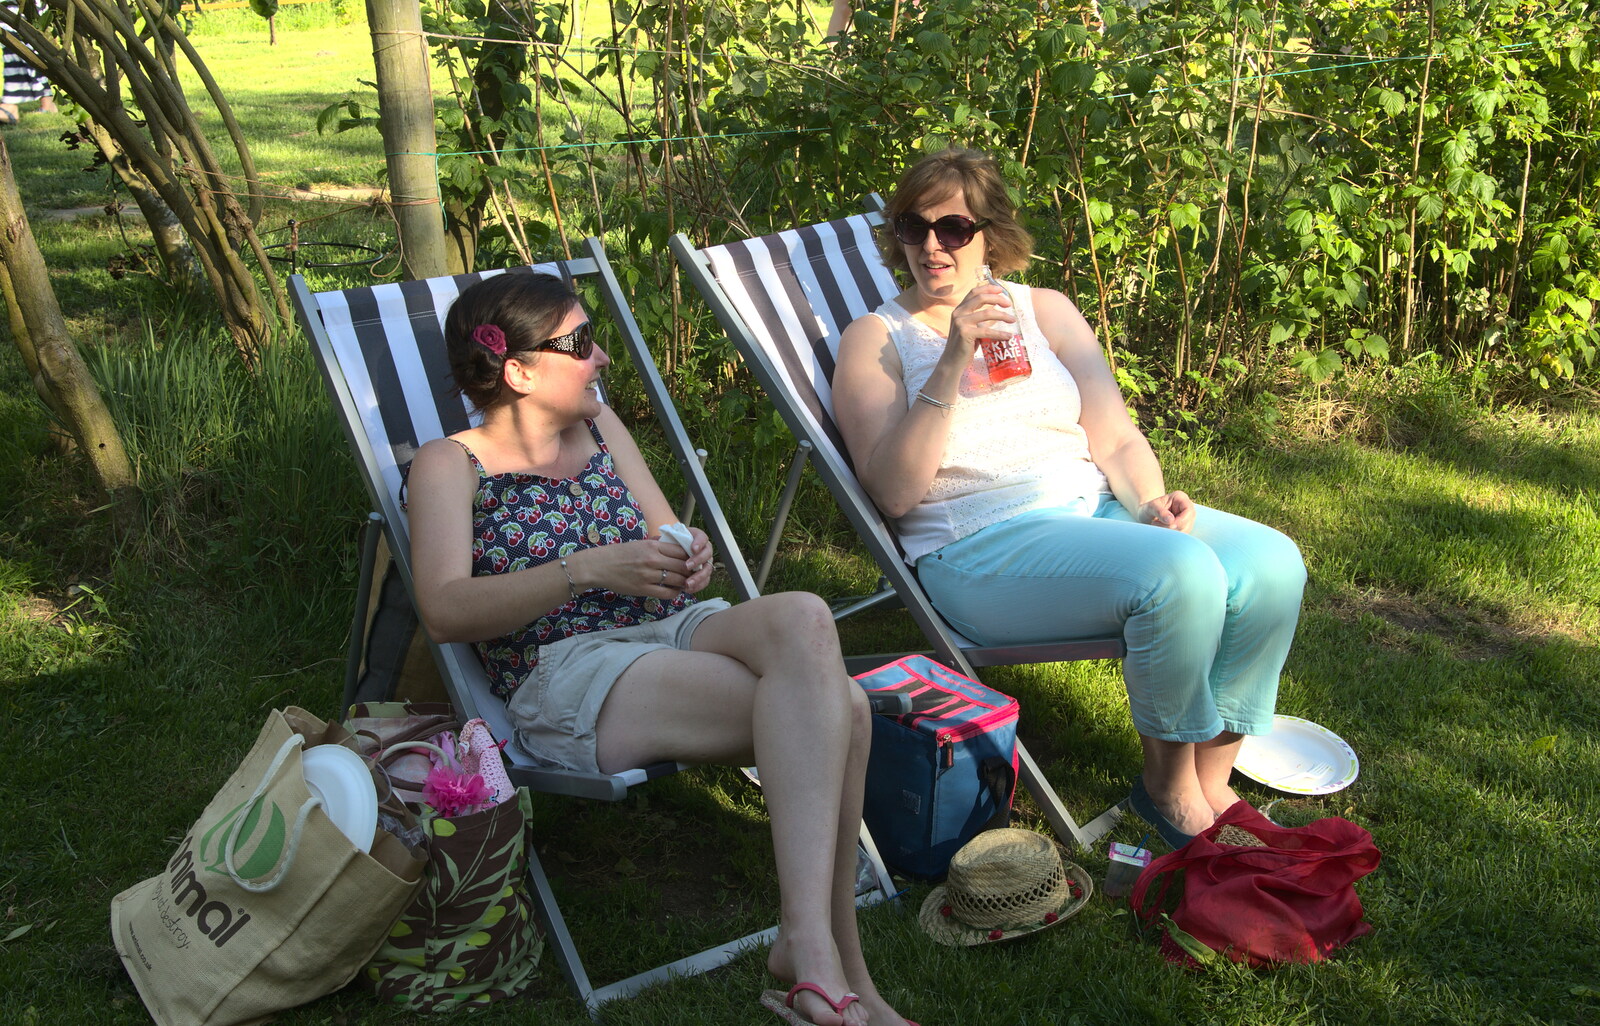 Rachel and Sarah chat from Wavy and Martina's Combined Birthdays, Thrandeston, Suffolk - 27th May 2017